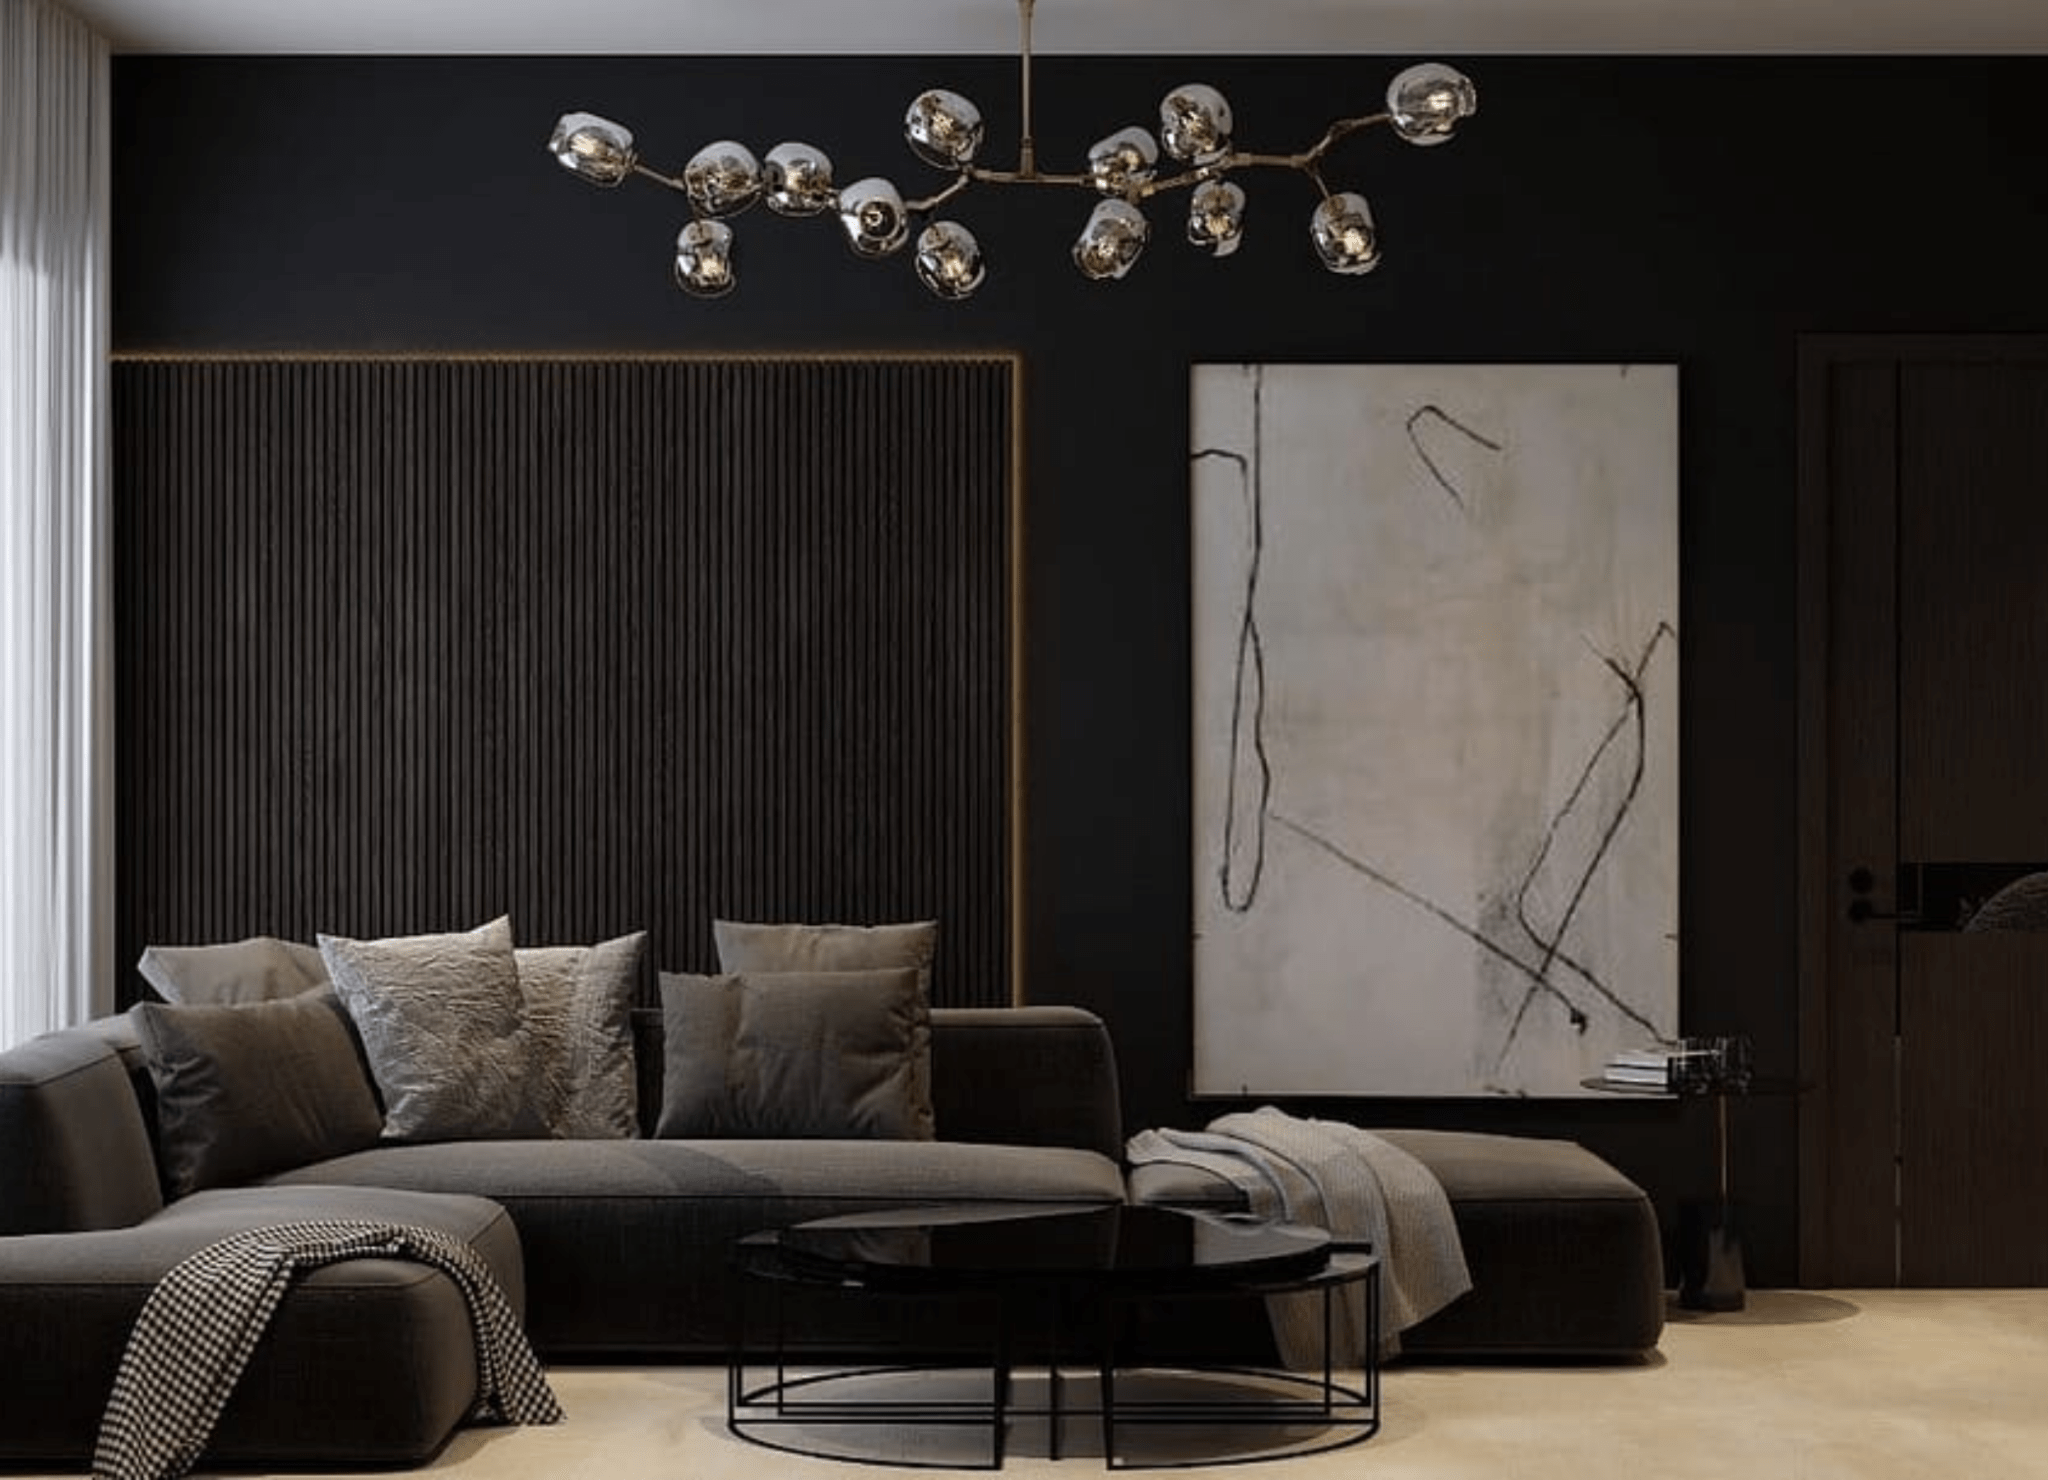 This image shows a grand living room with high ceilings and a dark wooden slatwall. there is a large piece of art hanging next to the slatwall with a large L-shaped sofa and coffee table in front